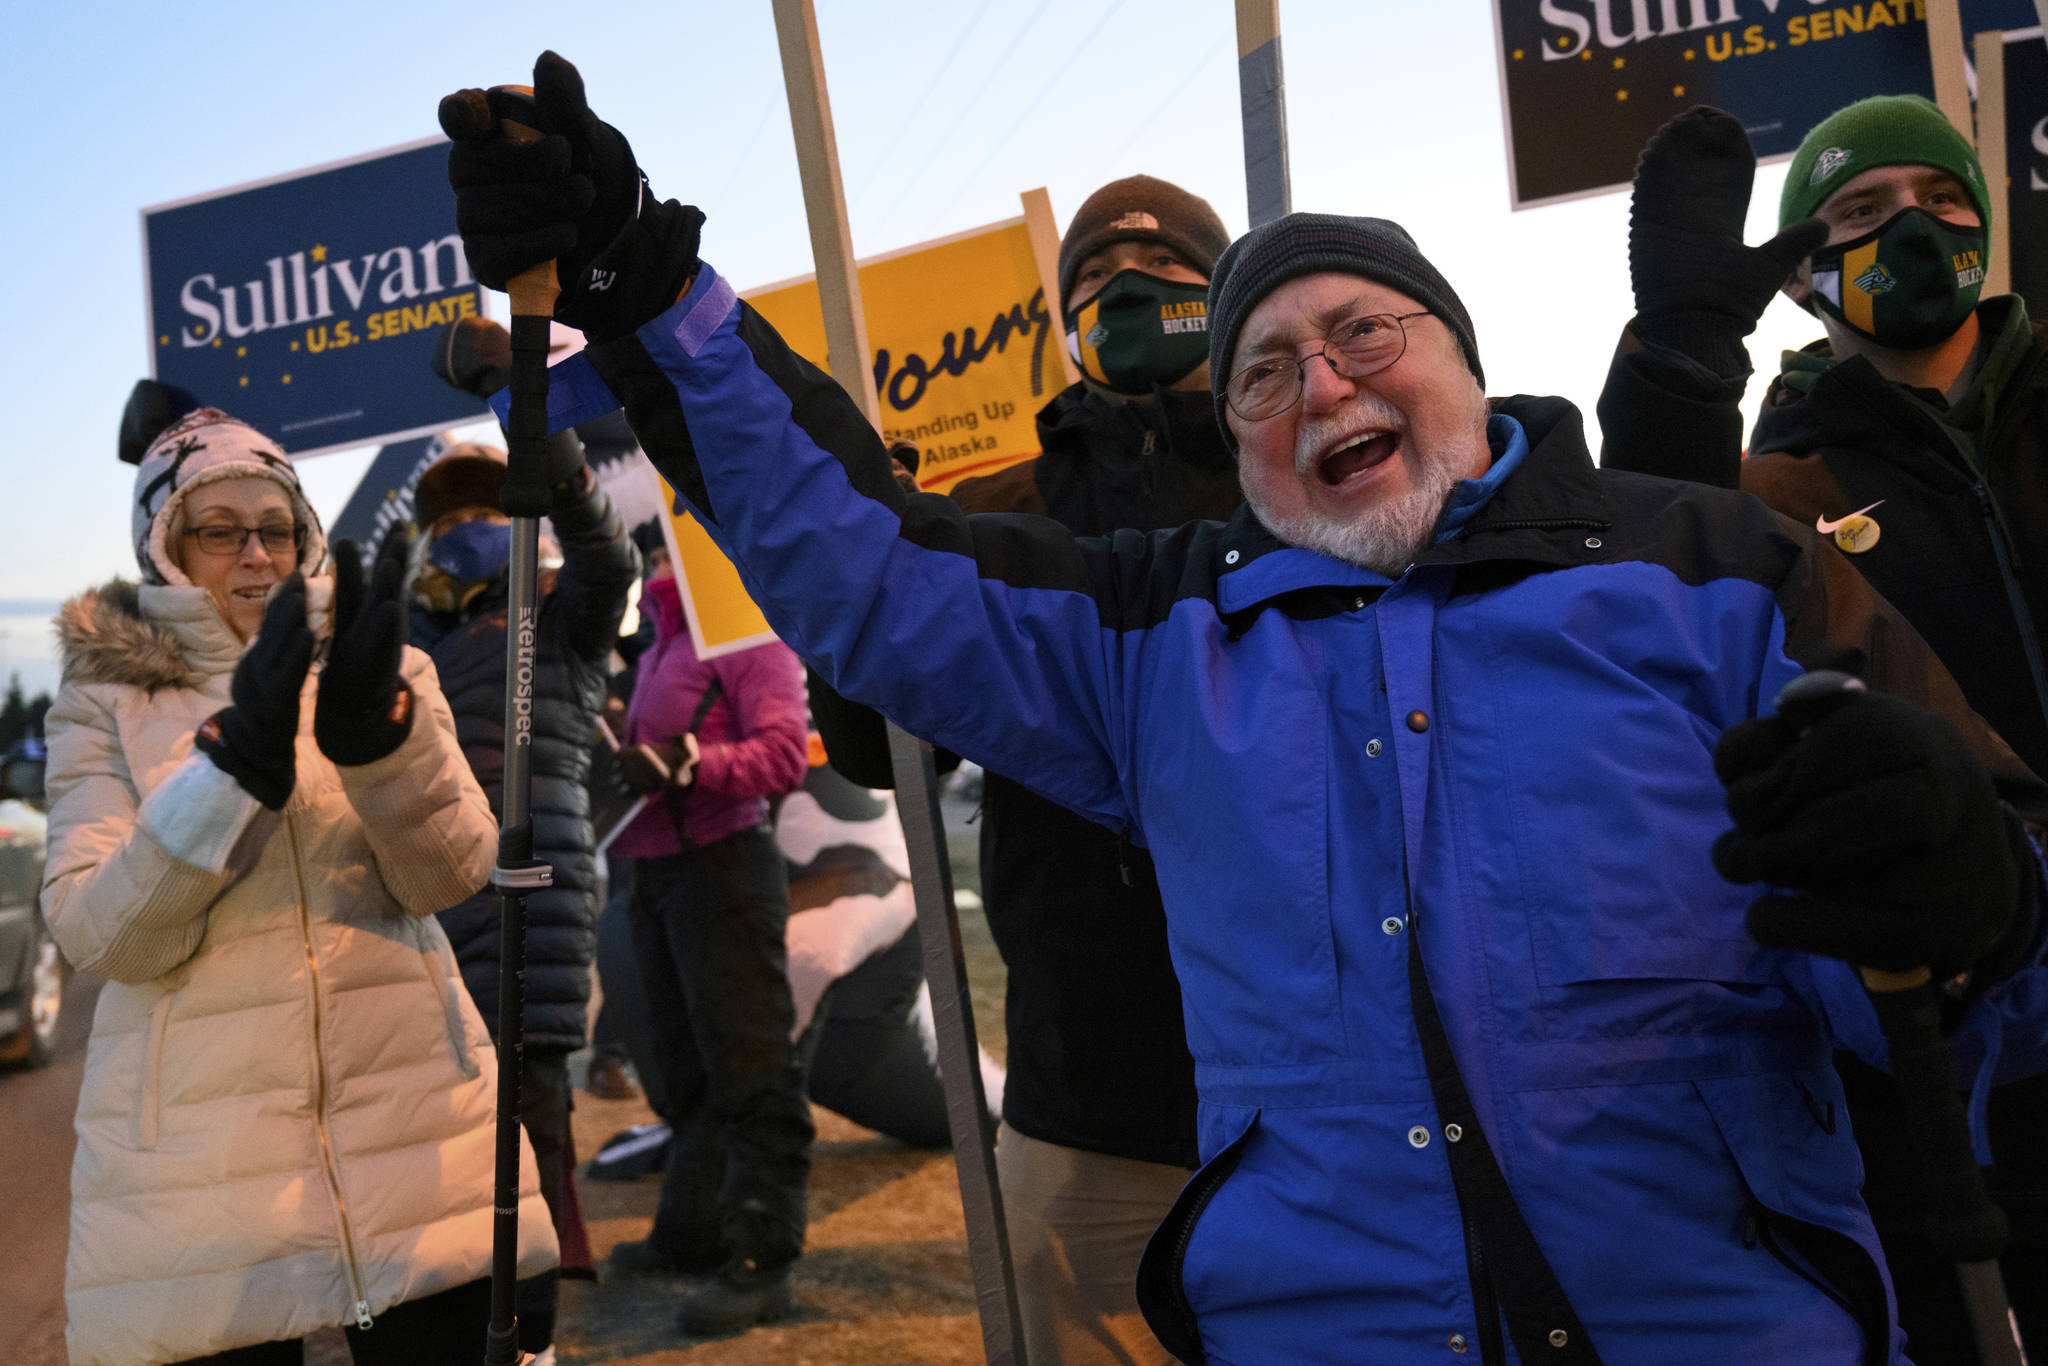 Rep. Don Young, R-Alaska, gathers with supporters Tuesday, Nov. 3, 2020, in Anchorage, Alaska. (Marc Lester / Anchorage Daily News)